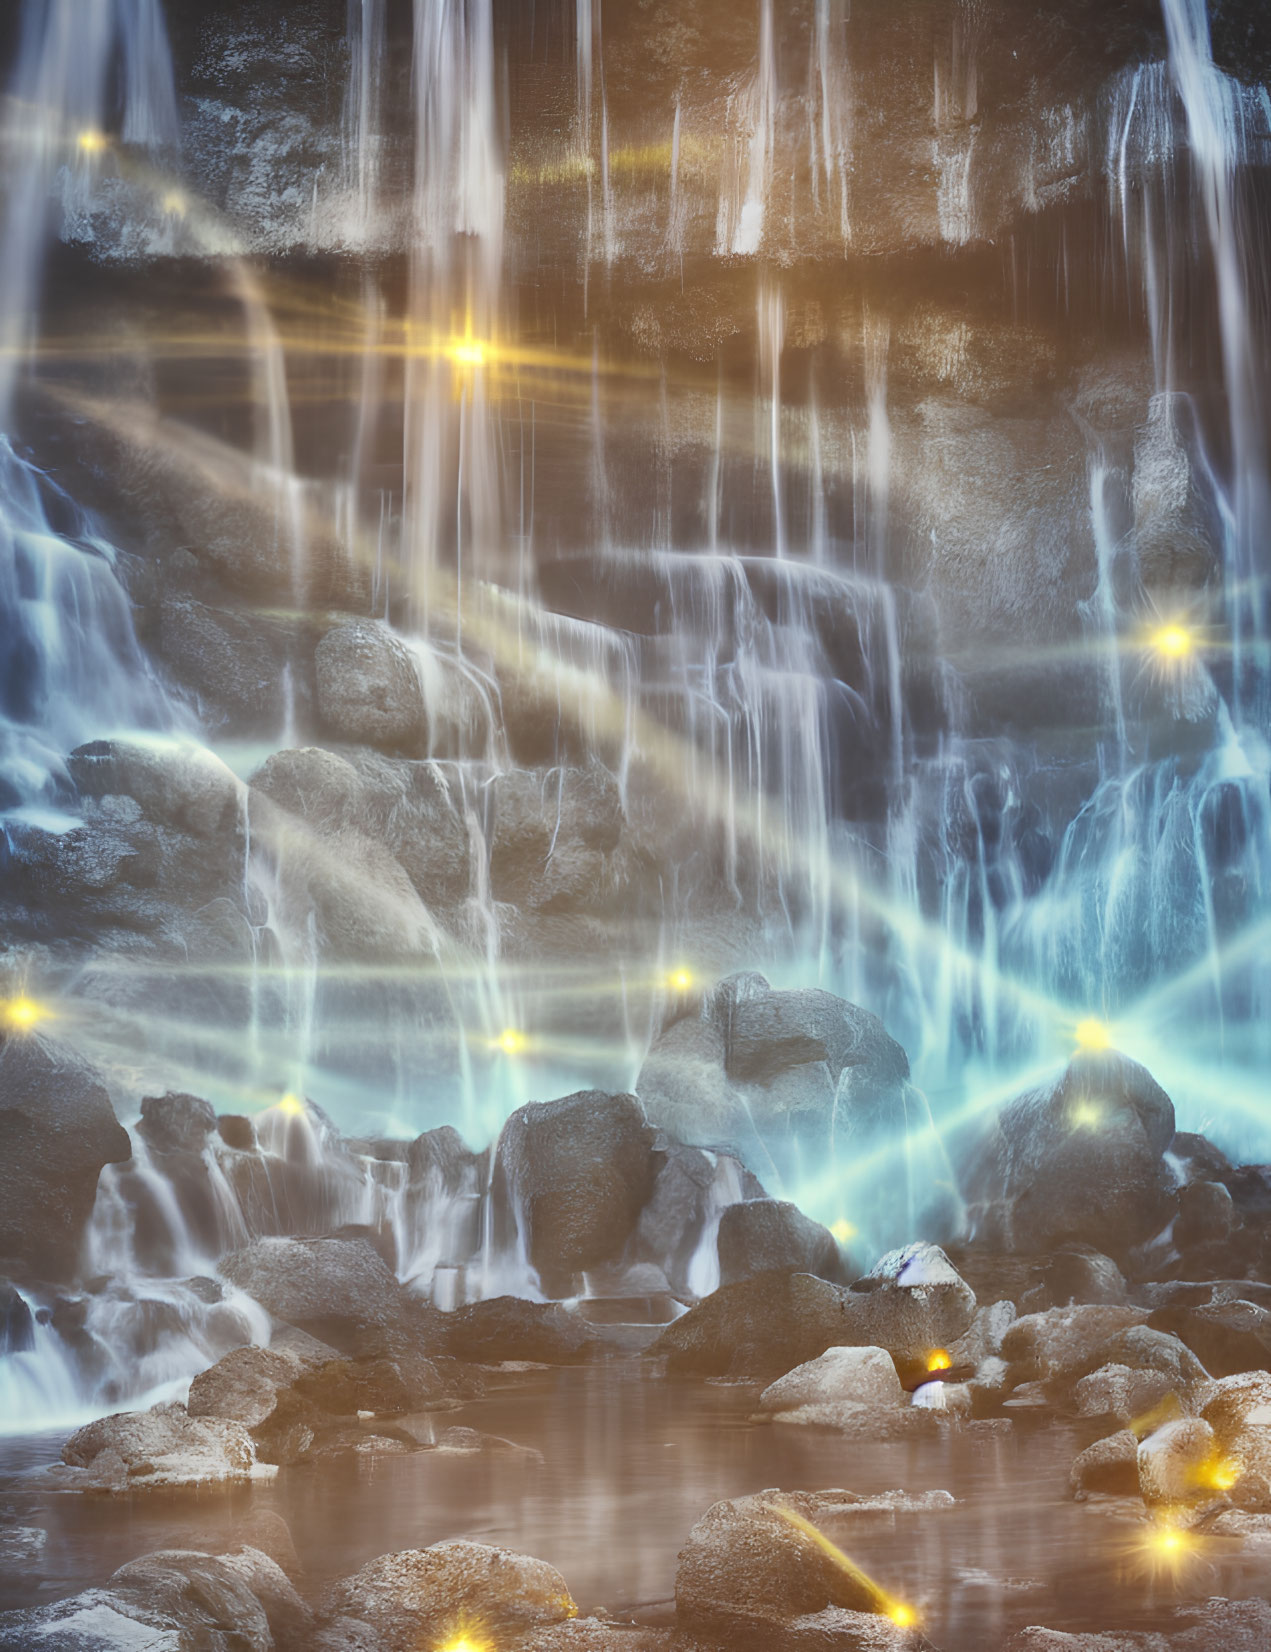 Tranquil waterfall illuminated by glowing lights